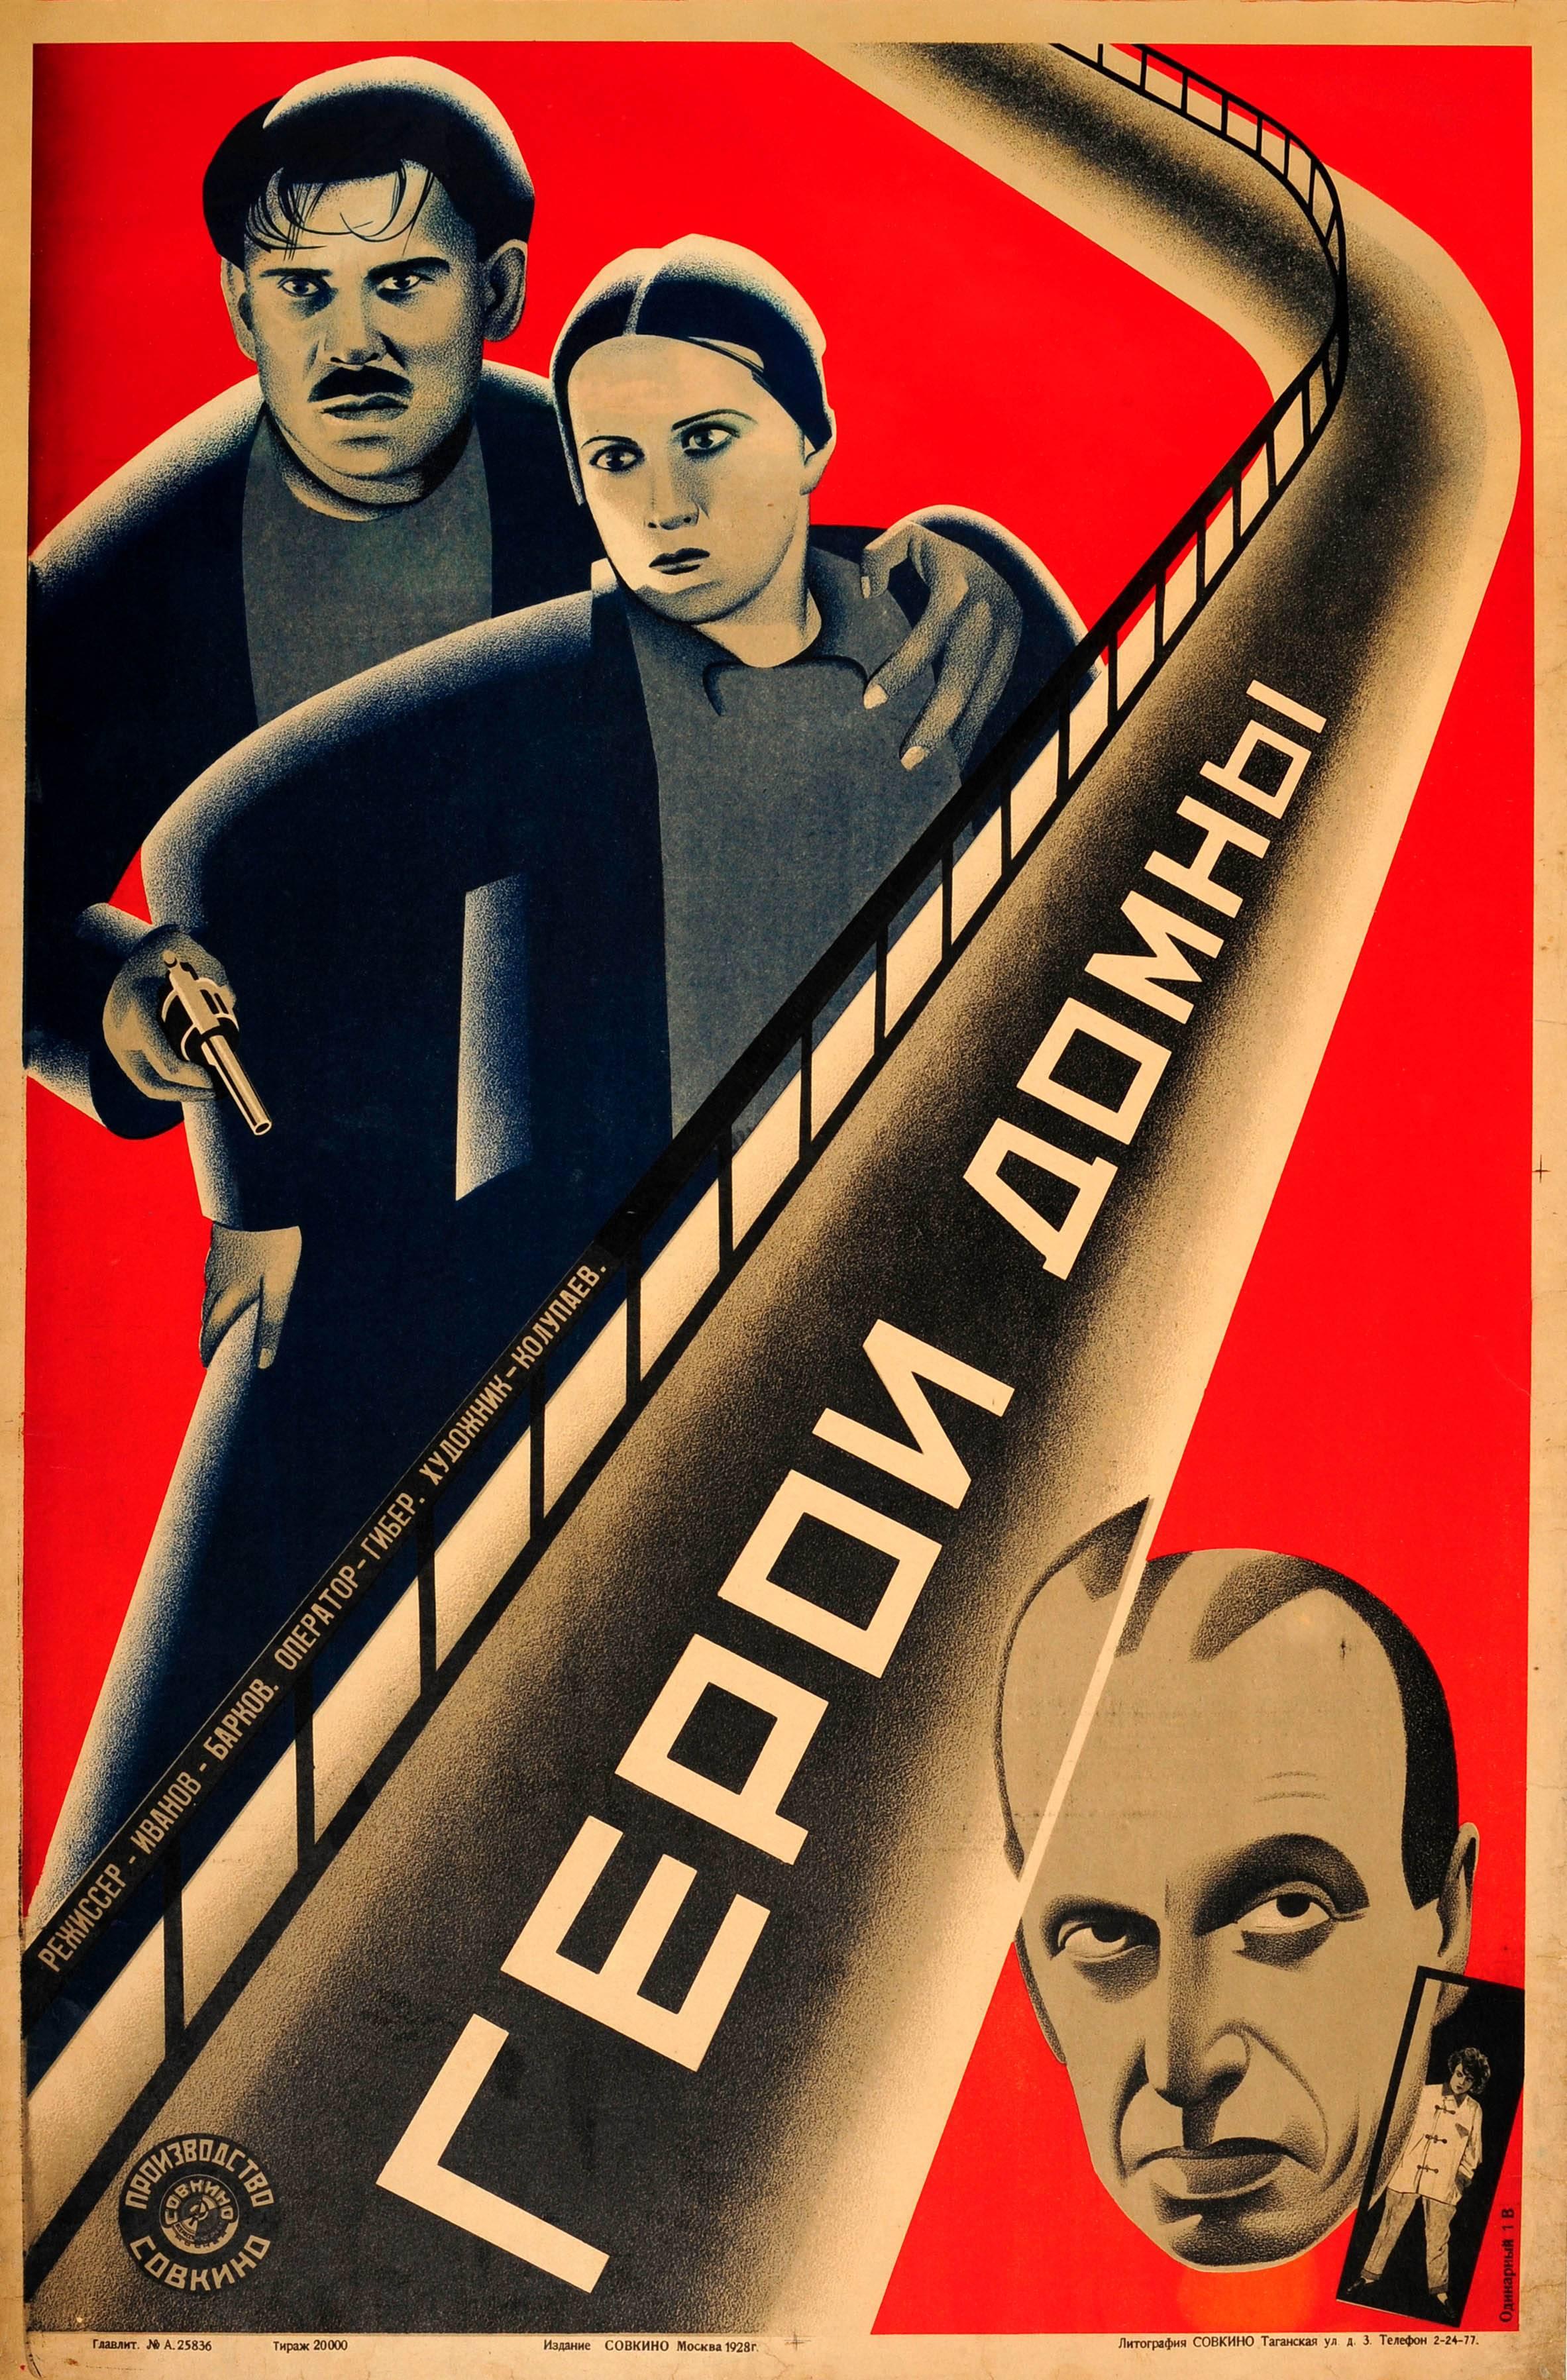 The Stenberg Brothers Print - Original Vintage Constructivist Movie Poster For A Soviet Film Heroes Of Furnace